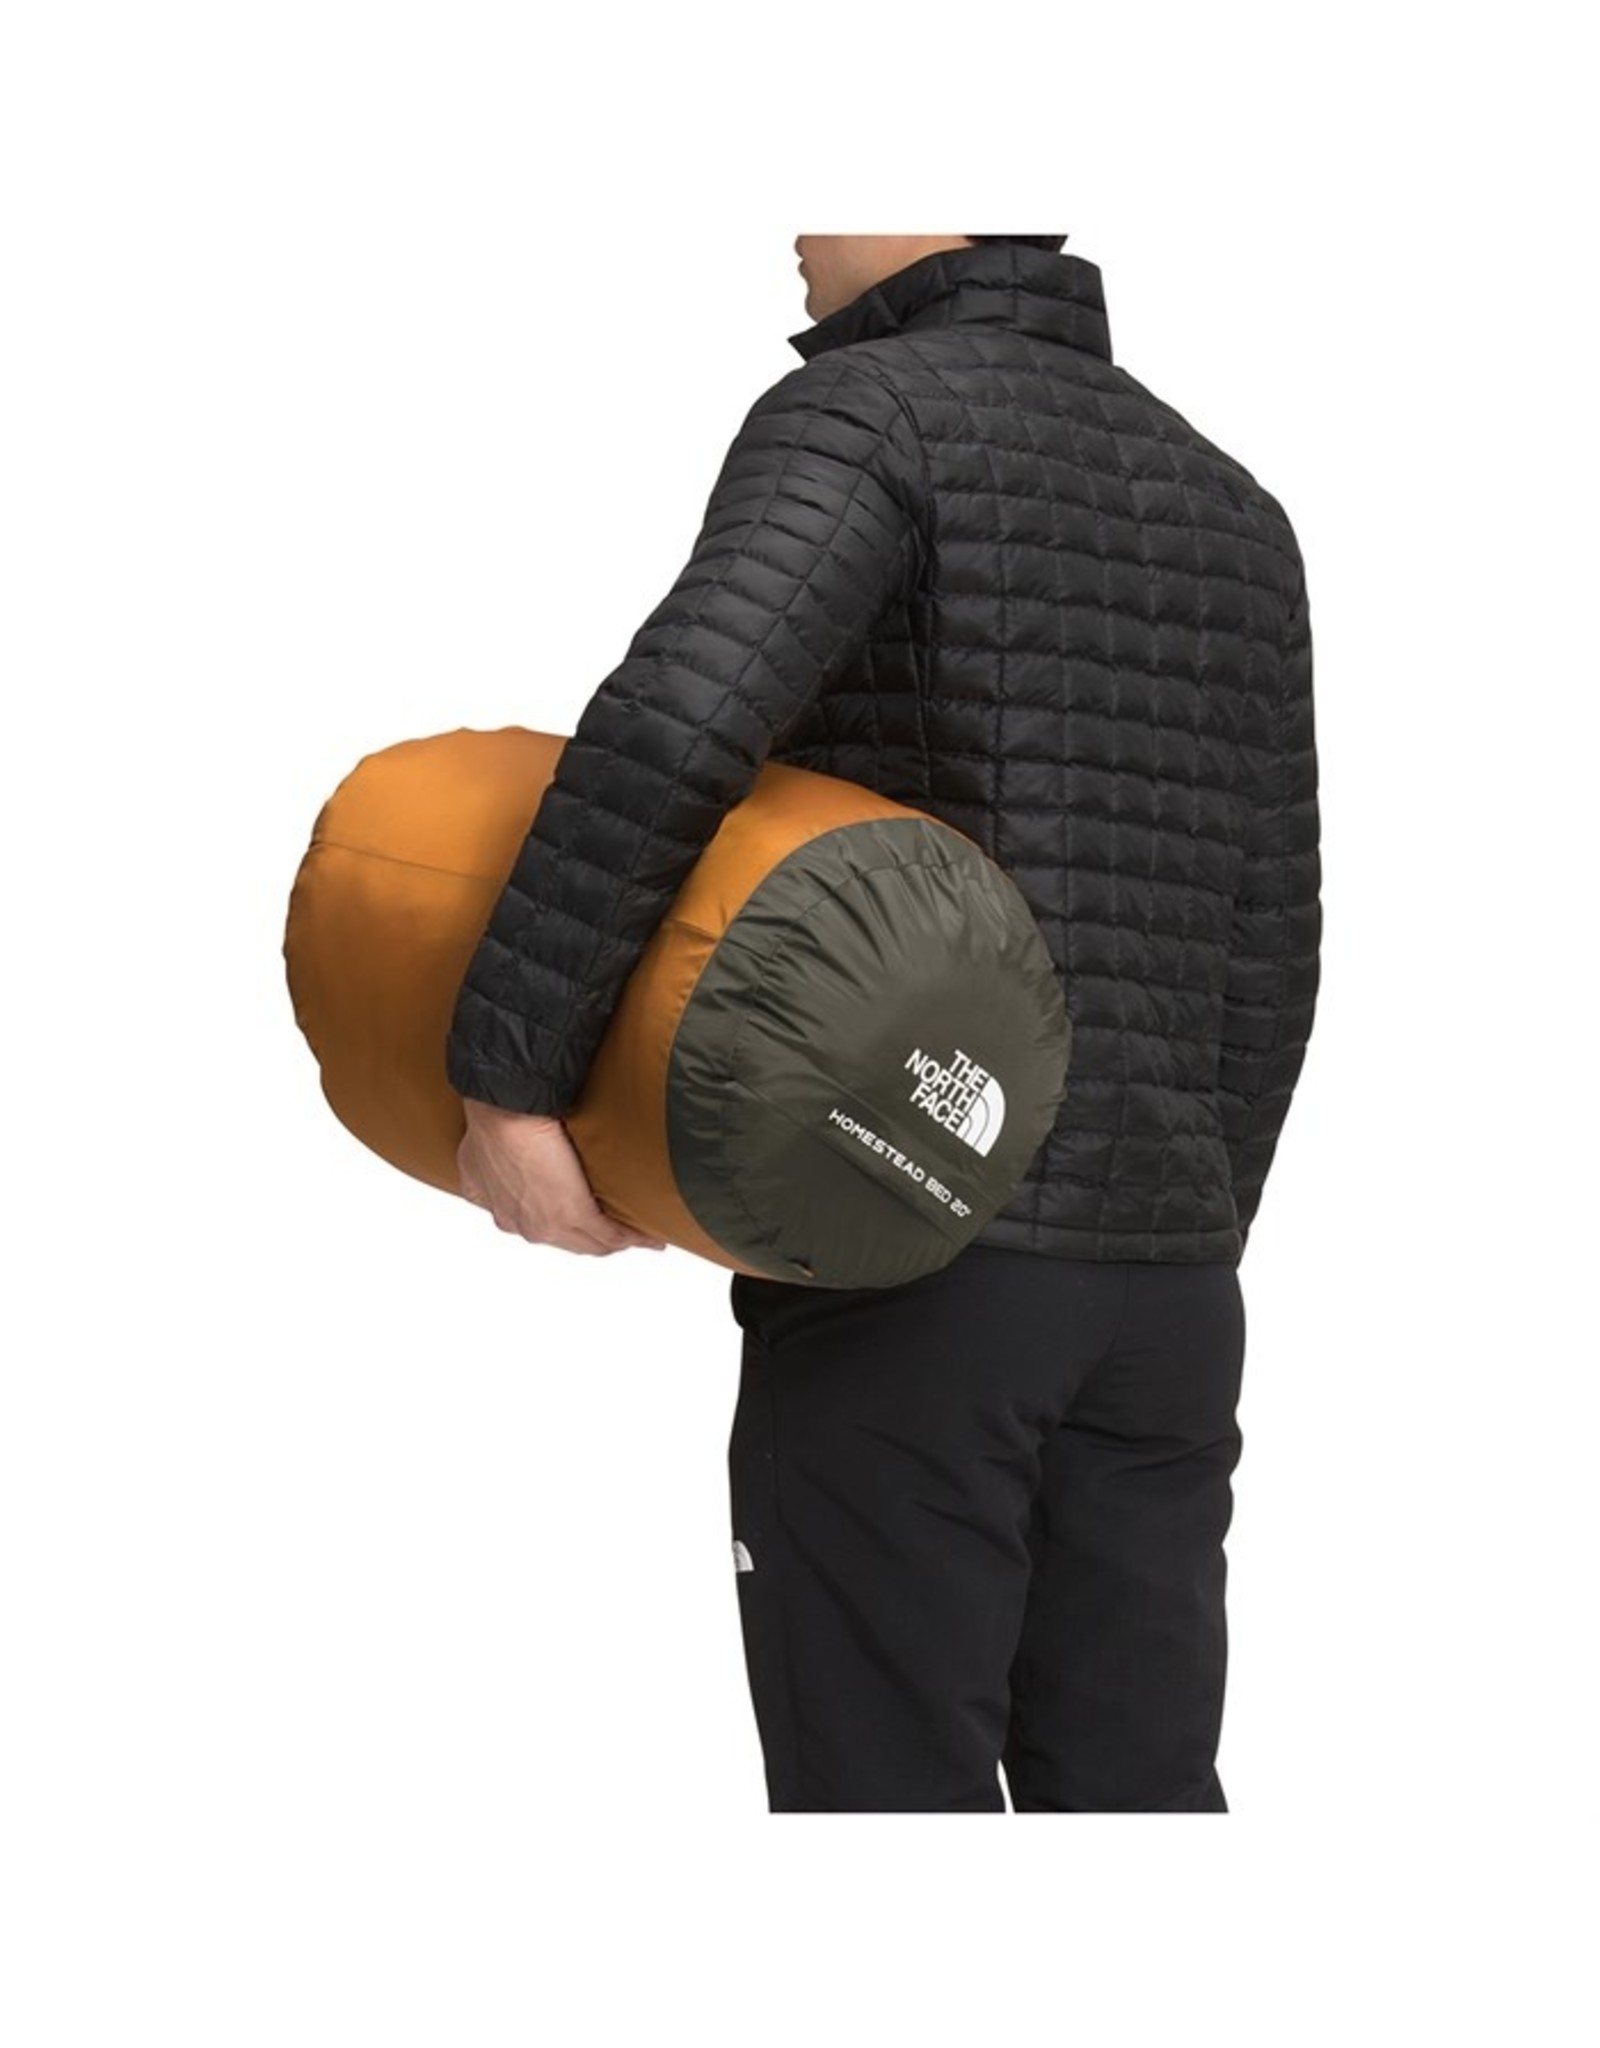 THE NORTH FACE HOMESTEAD BED REG BROWN ORANGE